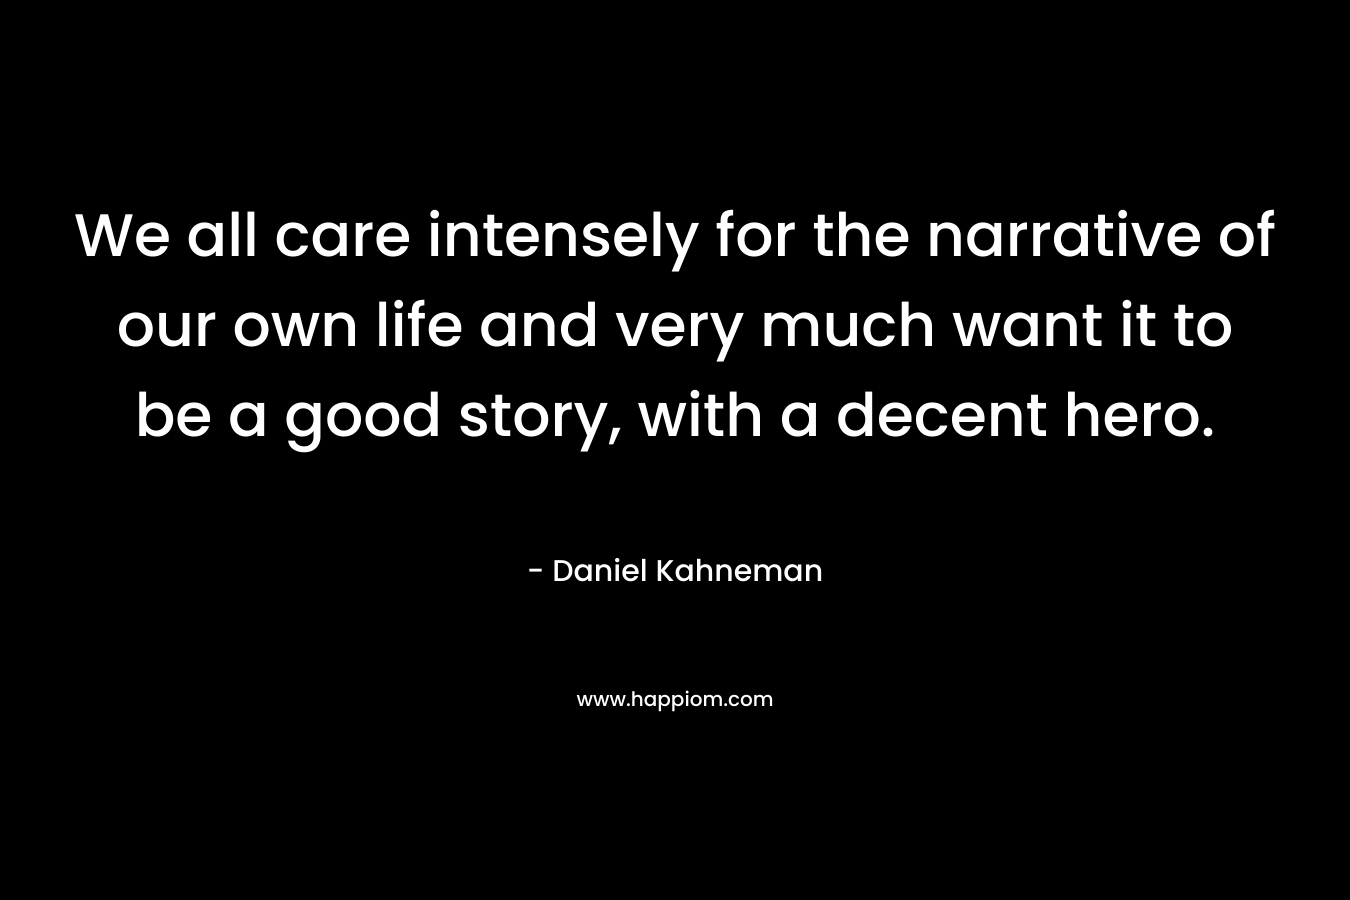 We all care intensely for the narrative of our own life and very much want it to be a good story, with a decent hero. – Daniel Kahneman